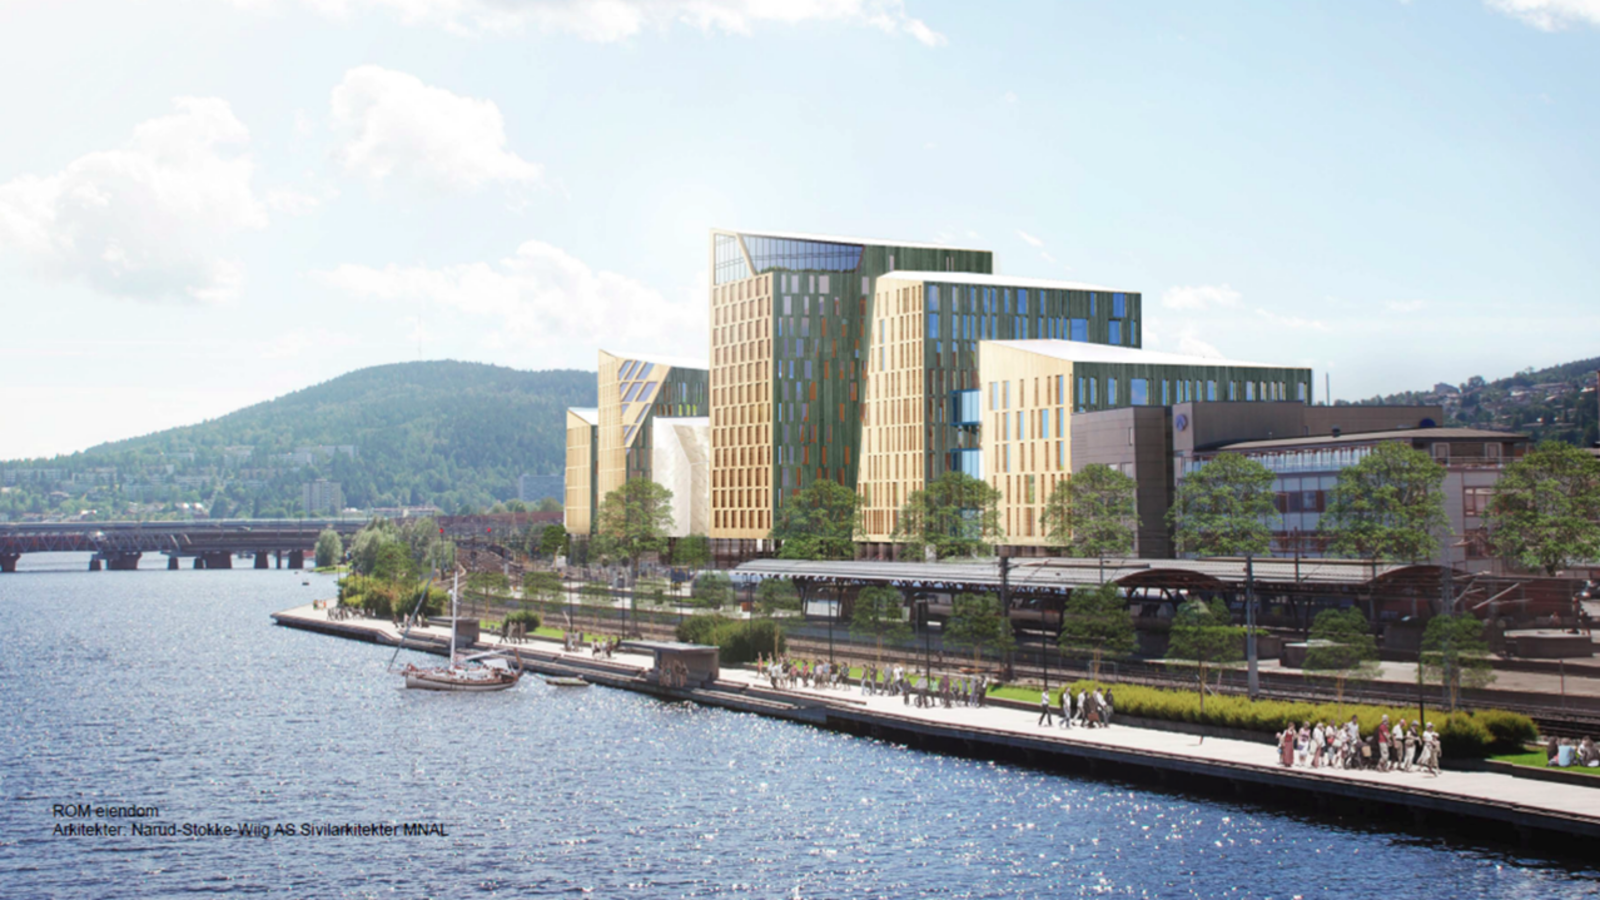 Drammen train station and Quality Hotel River Station